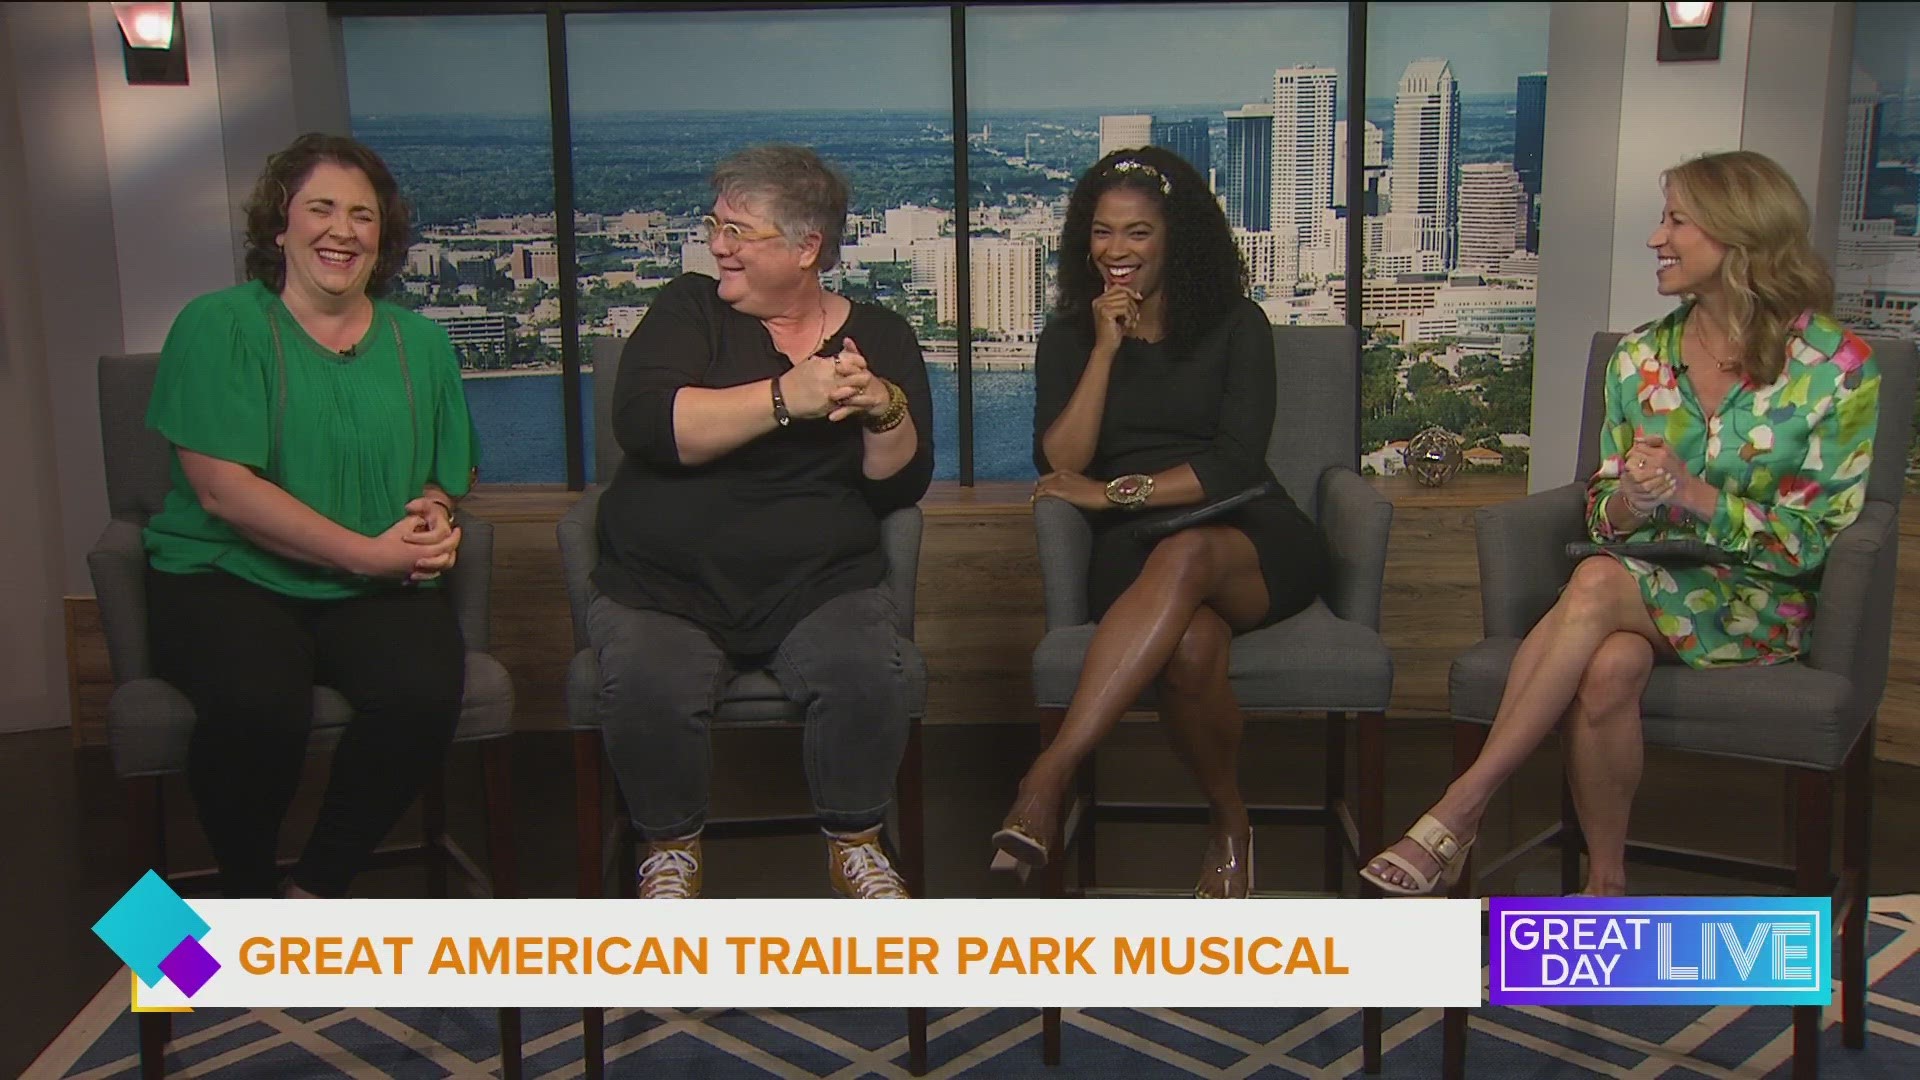 The Jerry Springer Show meets Broadway in the hilarious Stageworks Theatre production of The Great American Trailer Park Musical.